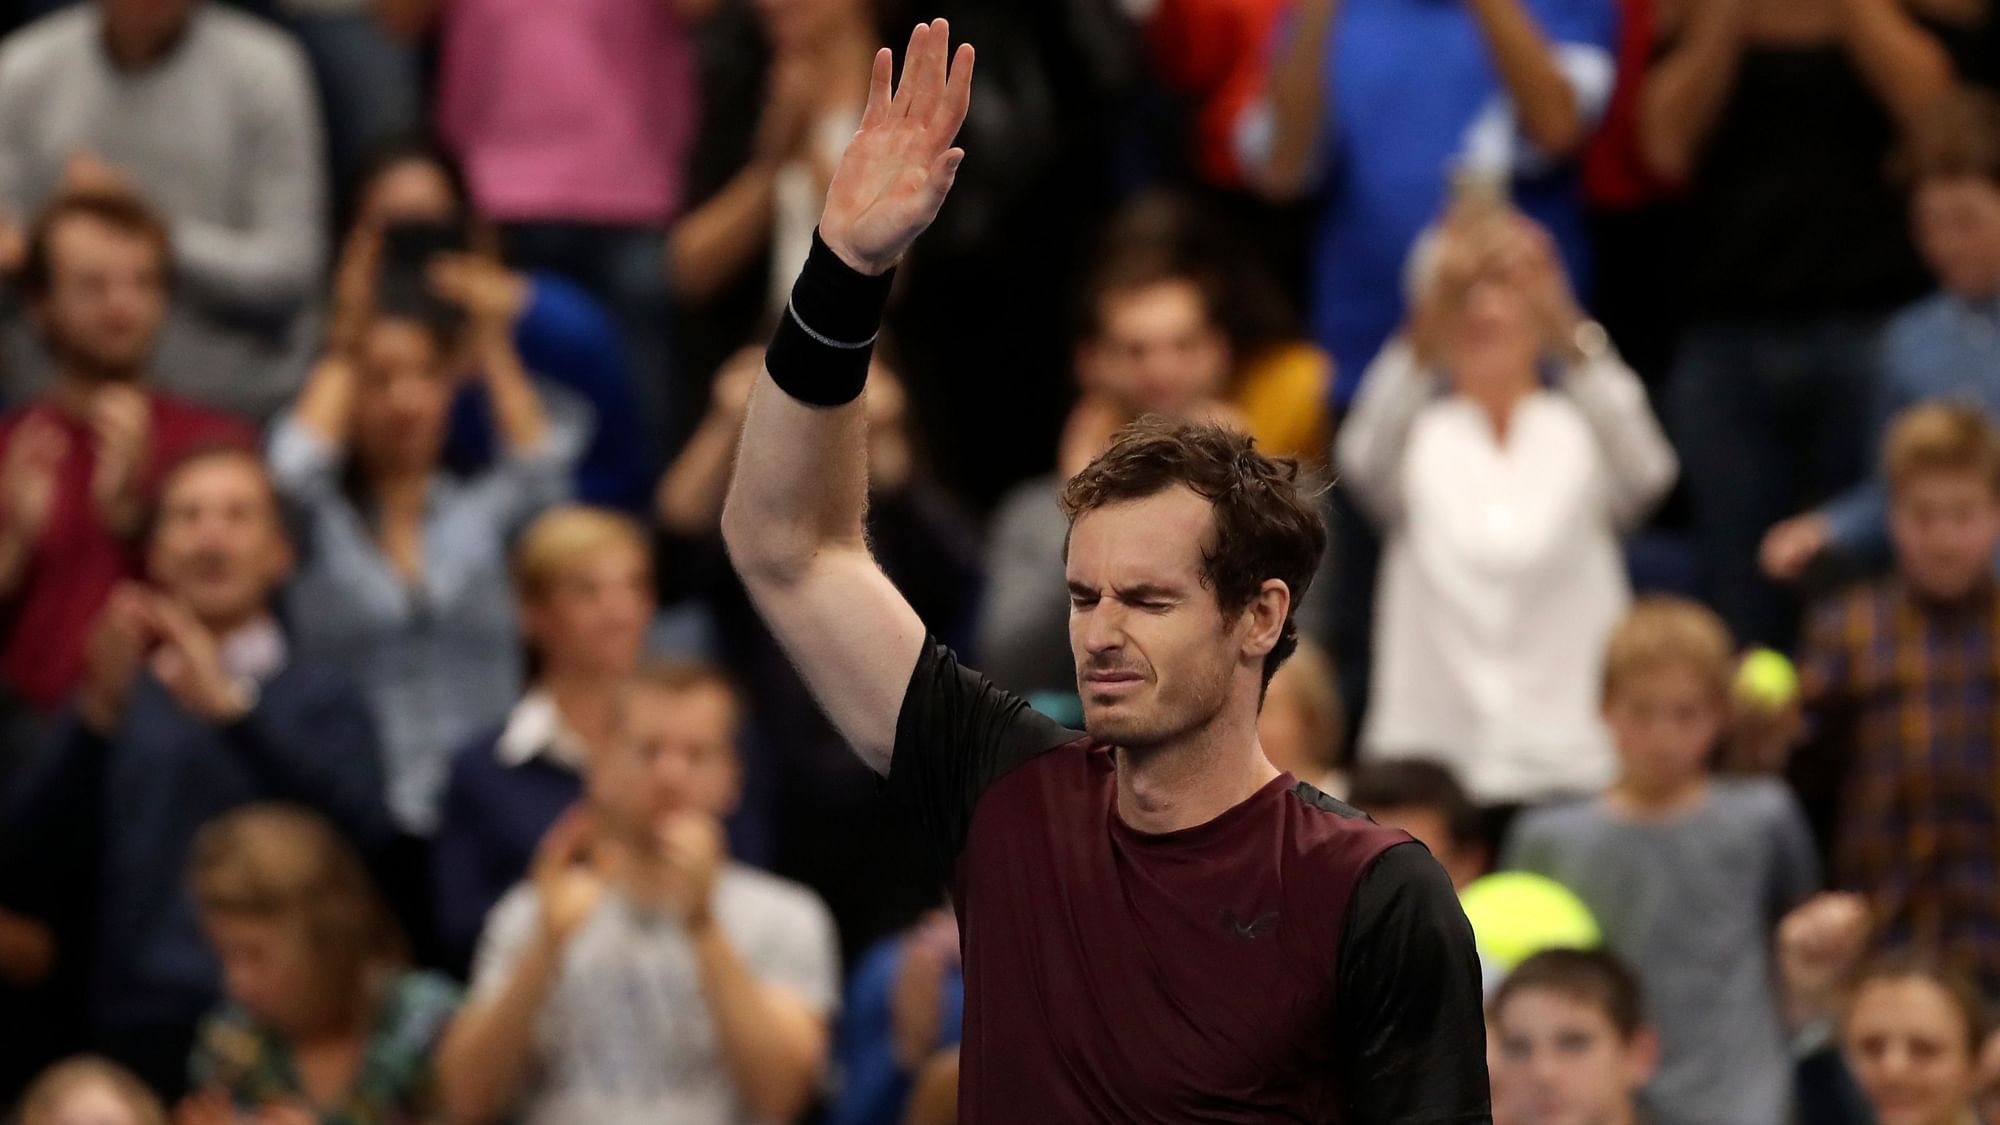 Andy Murray claimed his first ATP tour title in more than 2 1/2 years at the European Open on Sunday.